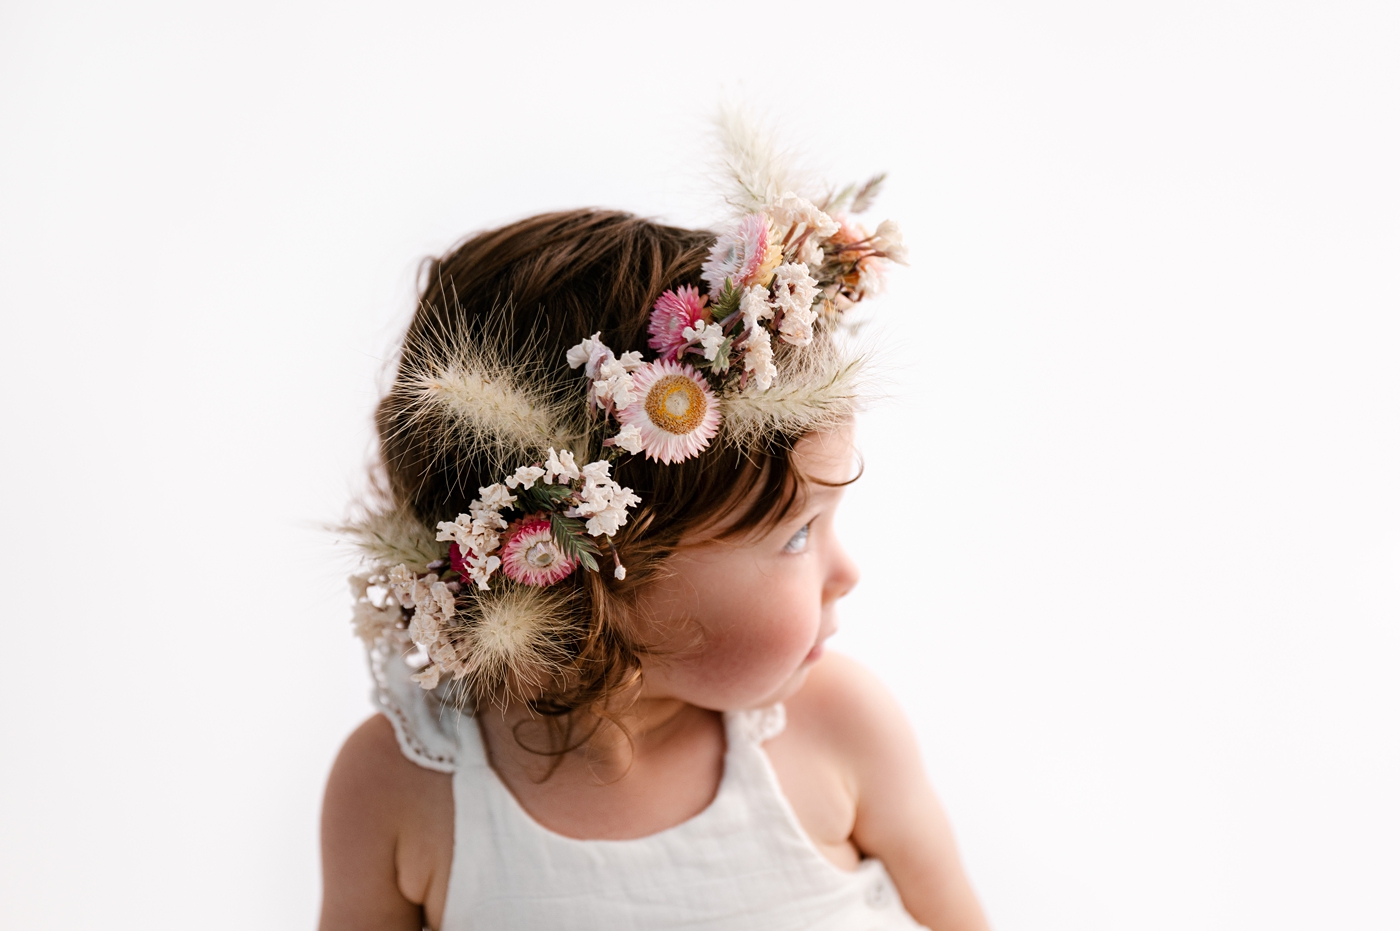 Dried floral crown in toddler girl's hair. Photo by Meg Newton Photography.